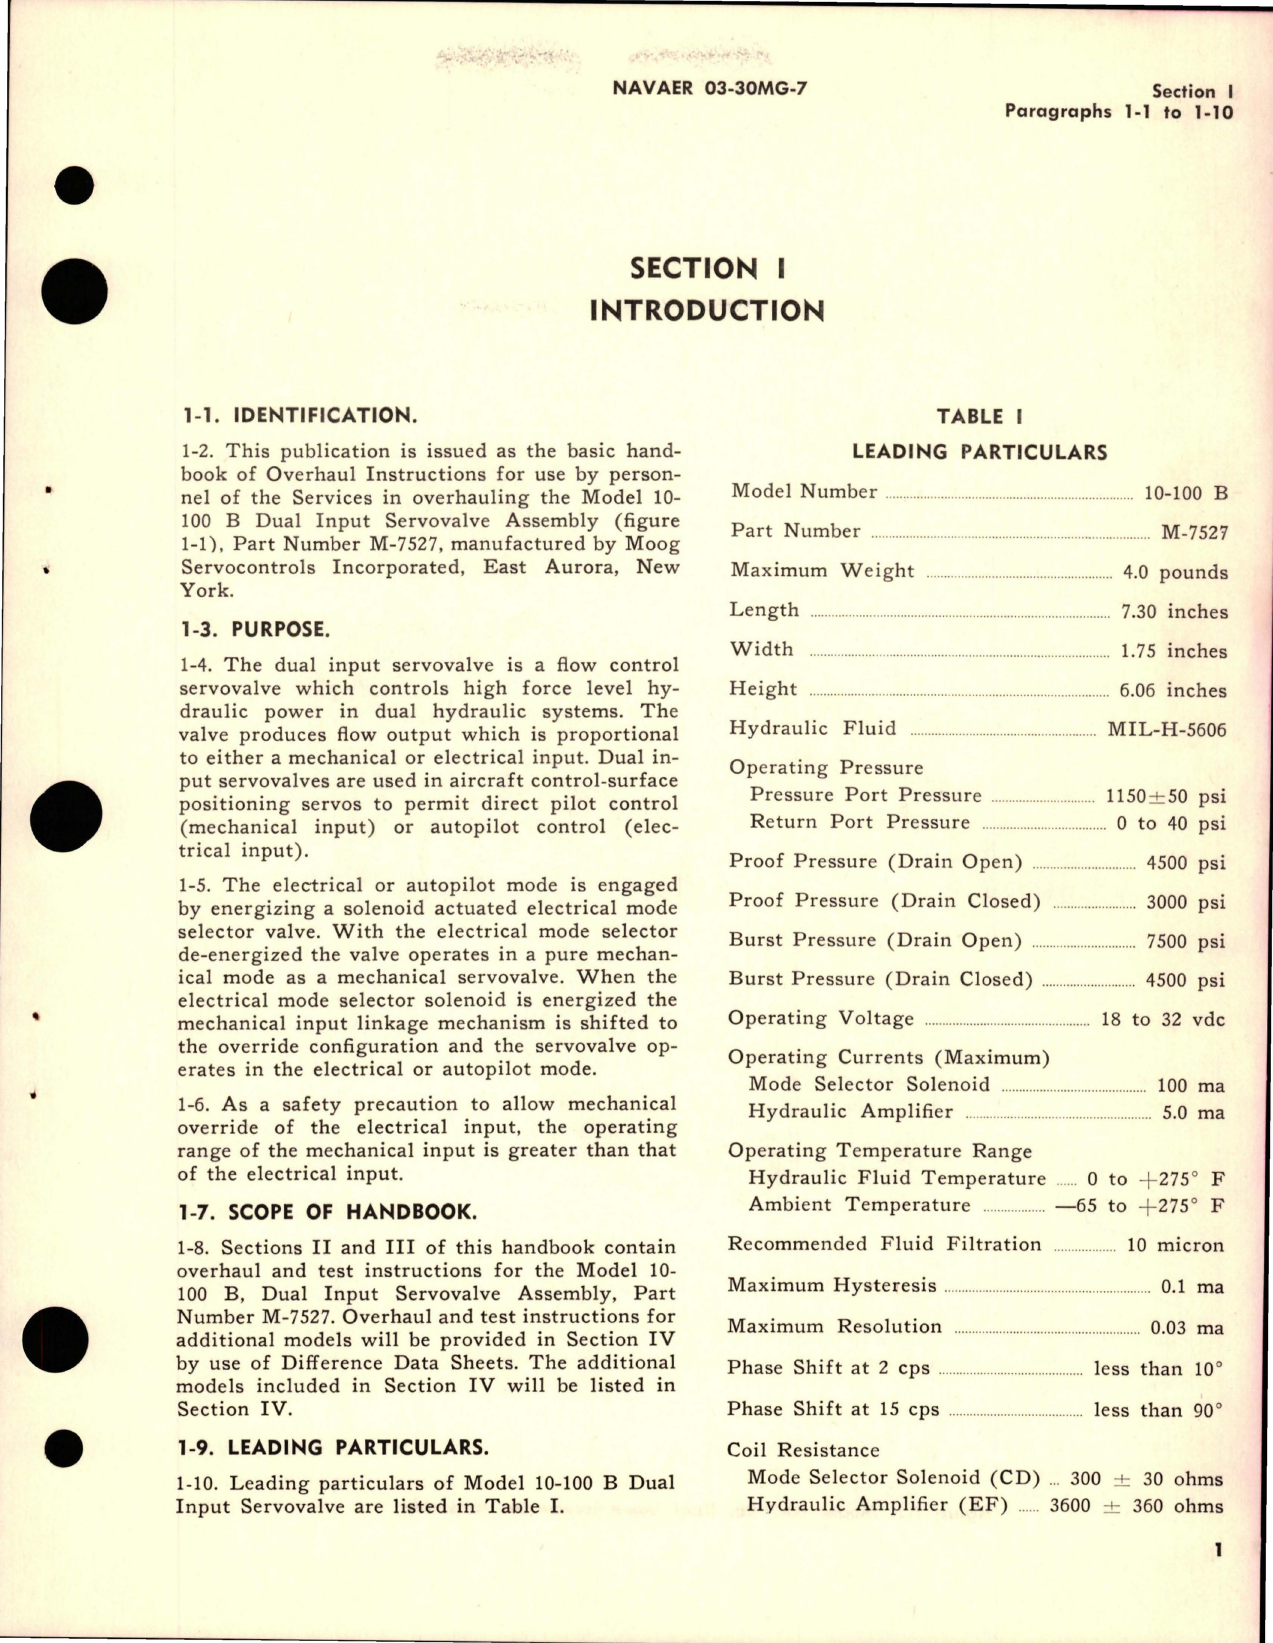 Sample page 5 from AirCorps Library document: Overhaul Instructions for Dual Input Servovalve Assembly - Model 10-100B - Part M-7527